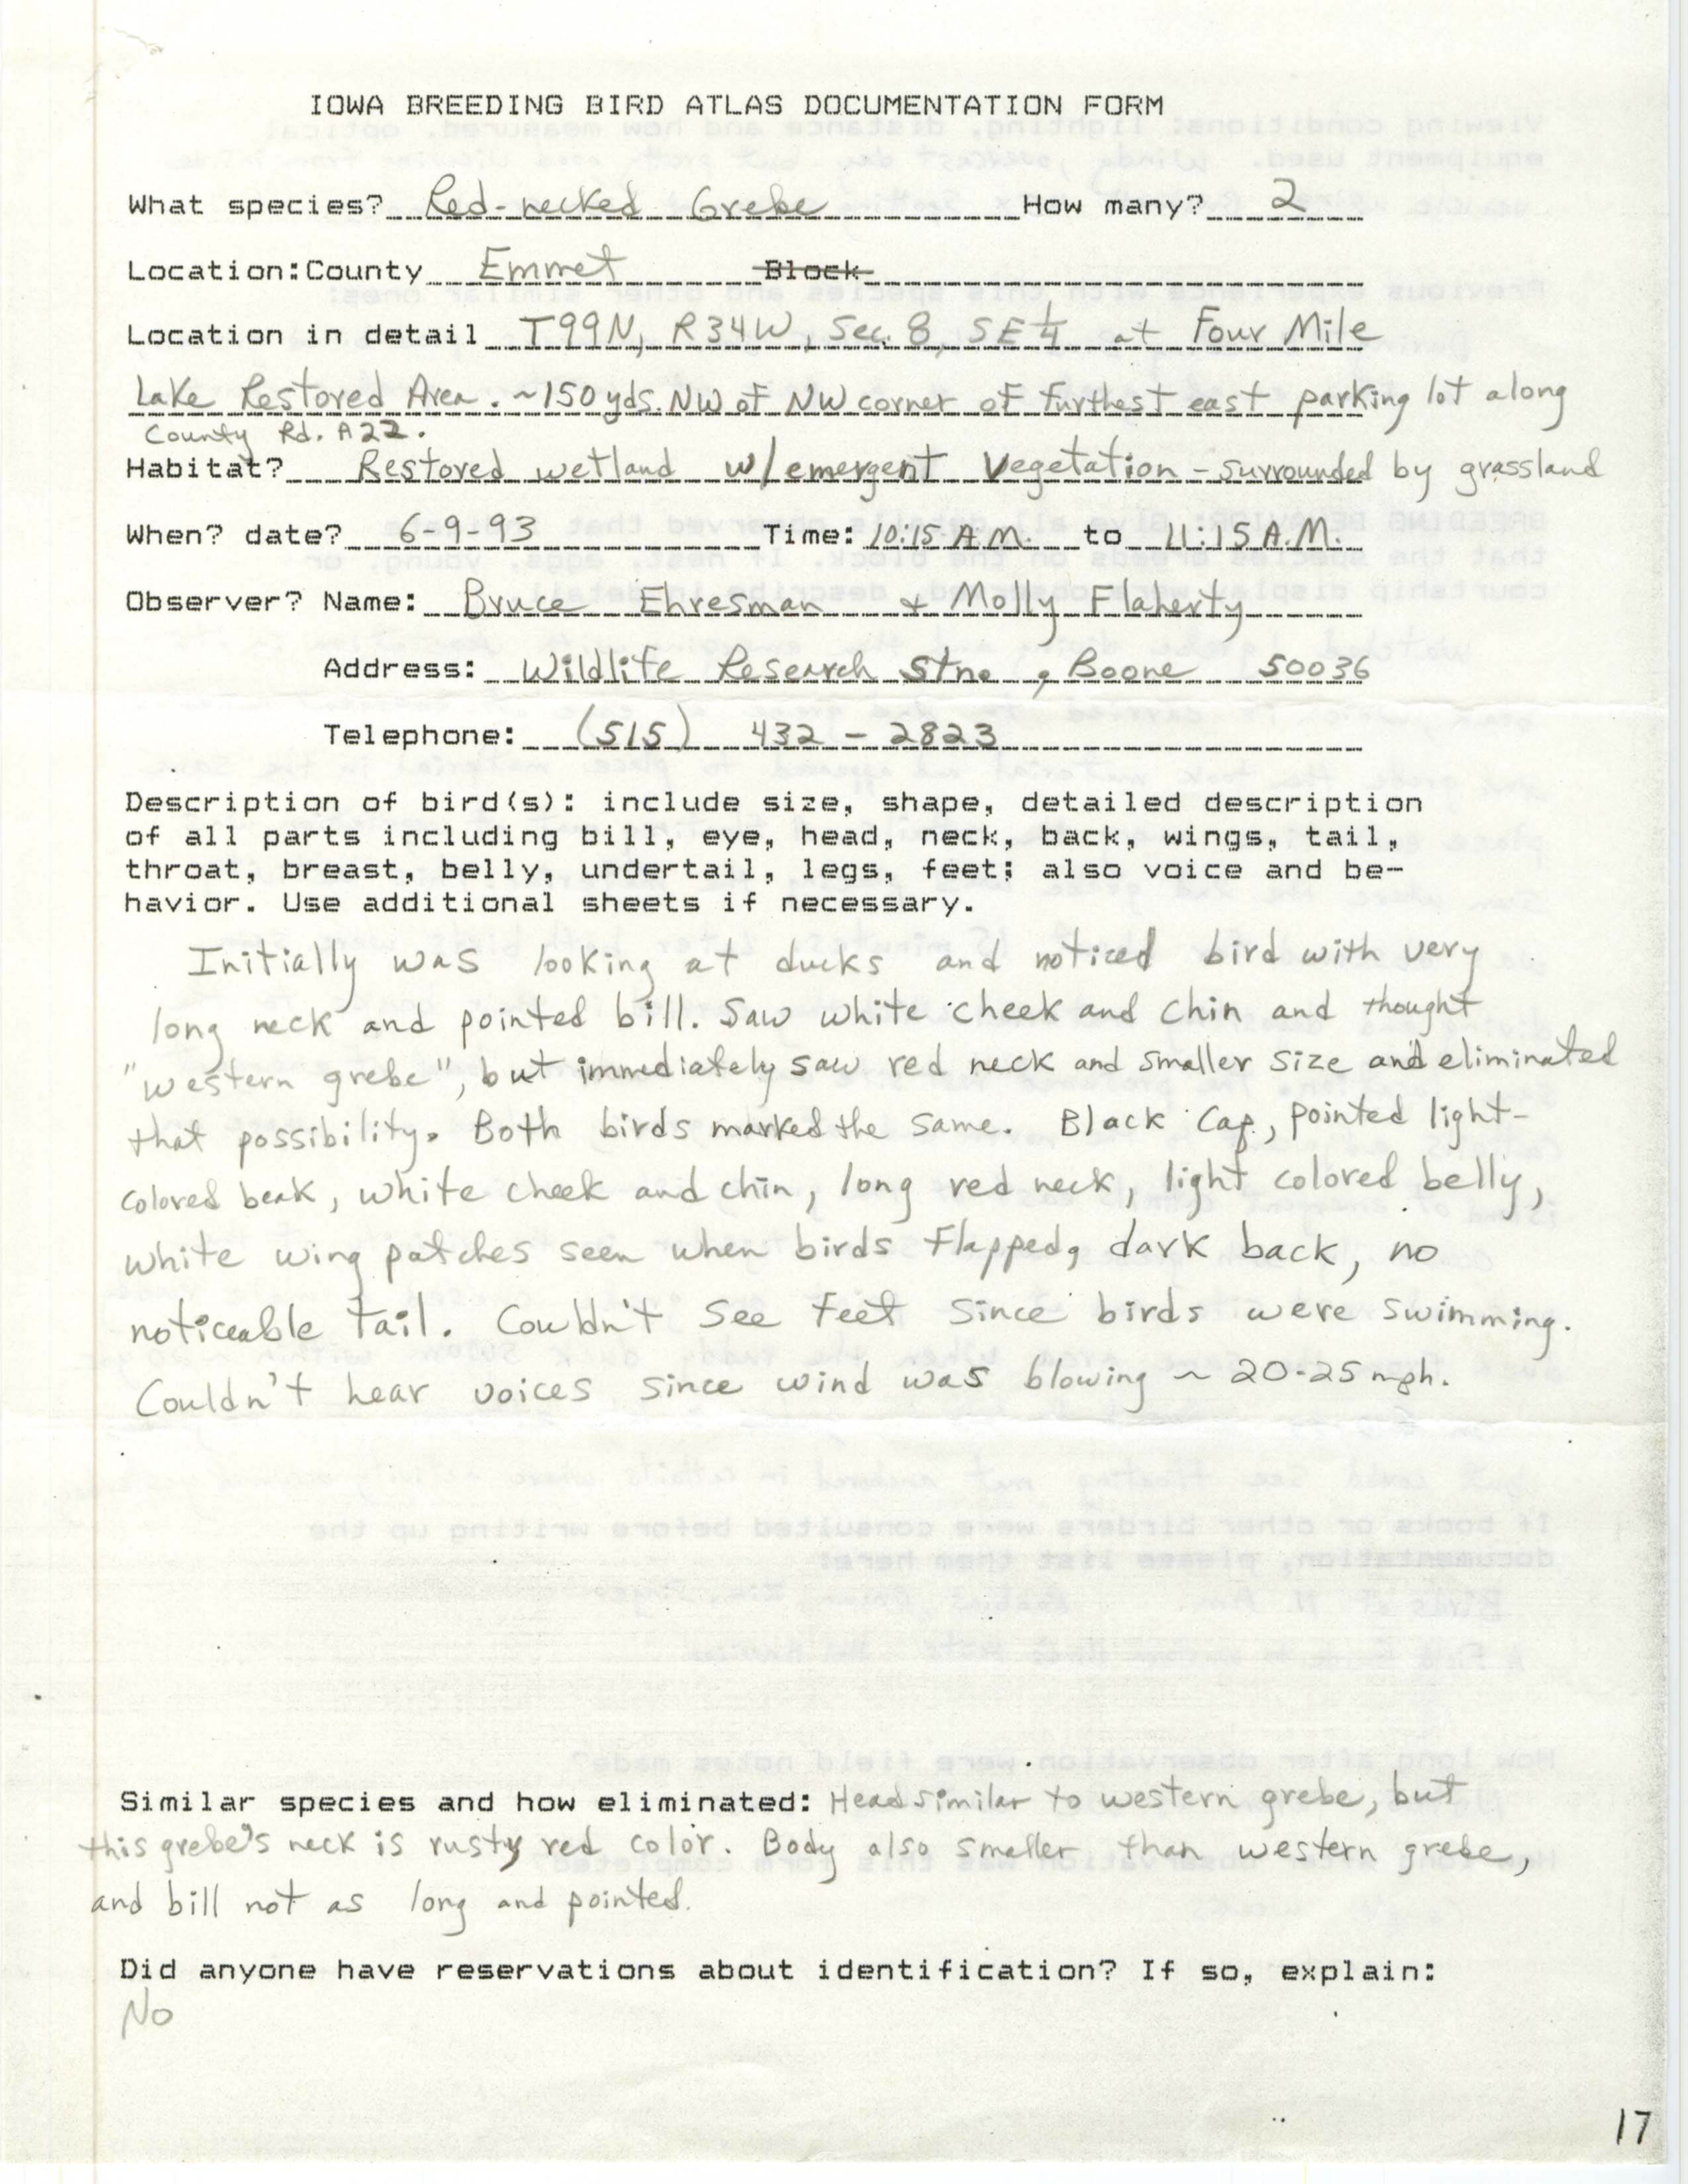 Rare bird documentation form for Red-necked Grebe at Four Mile Lake, 1993